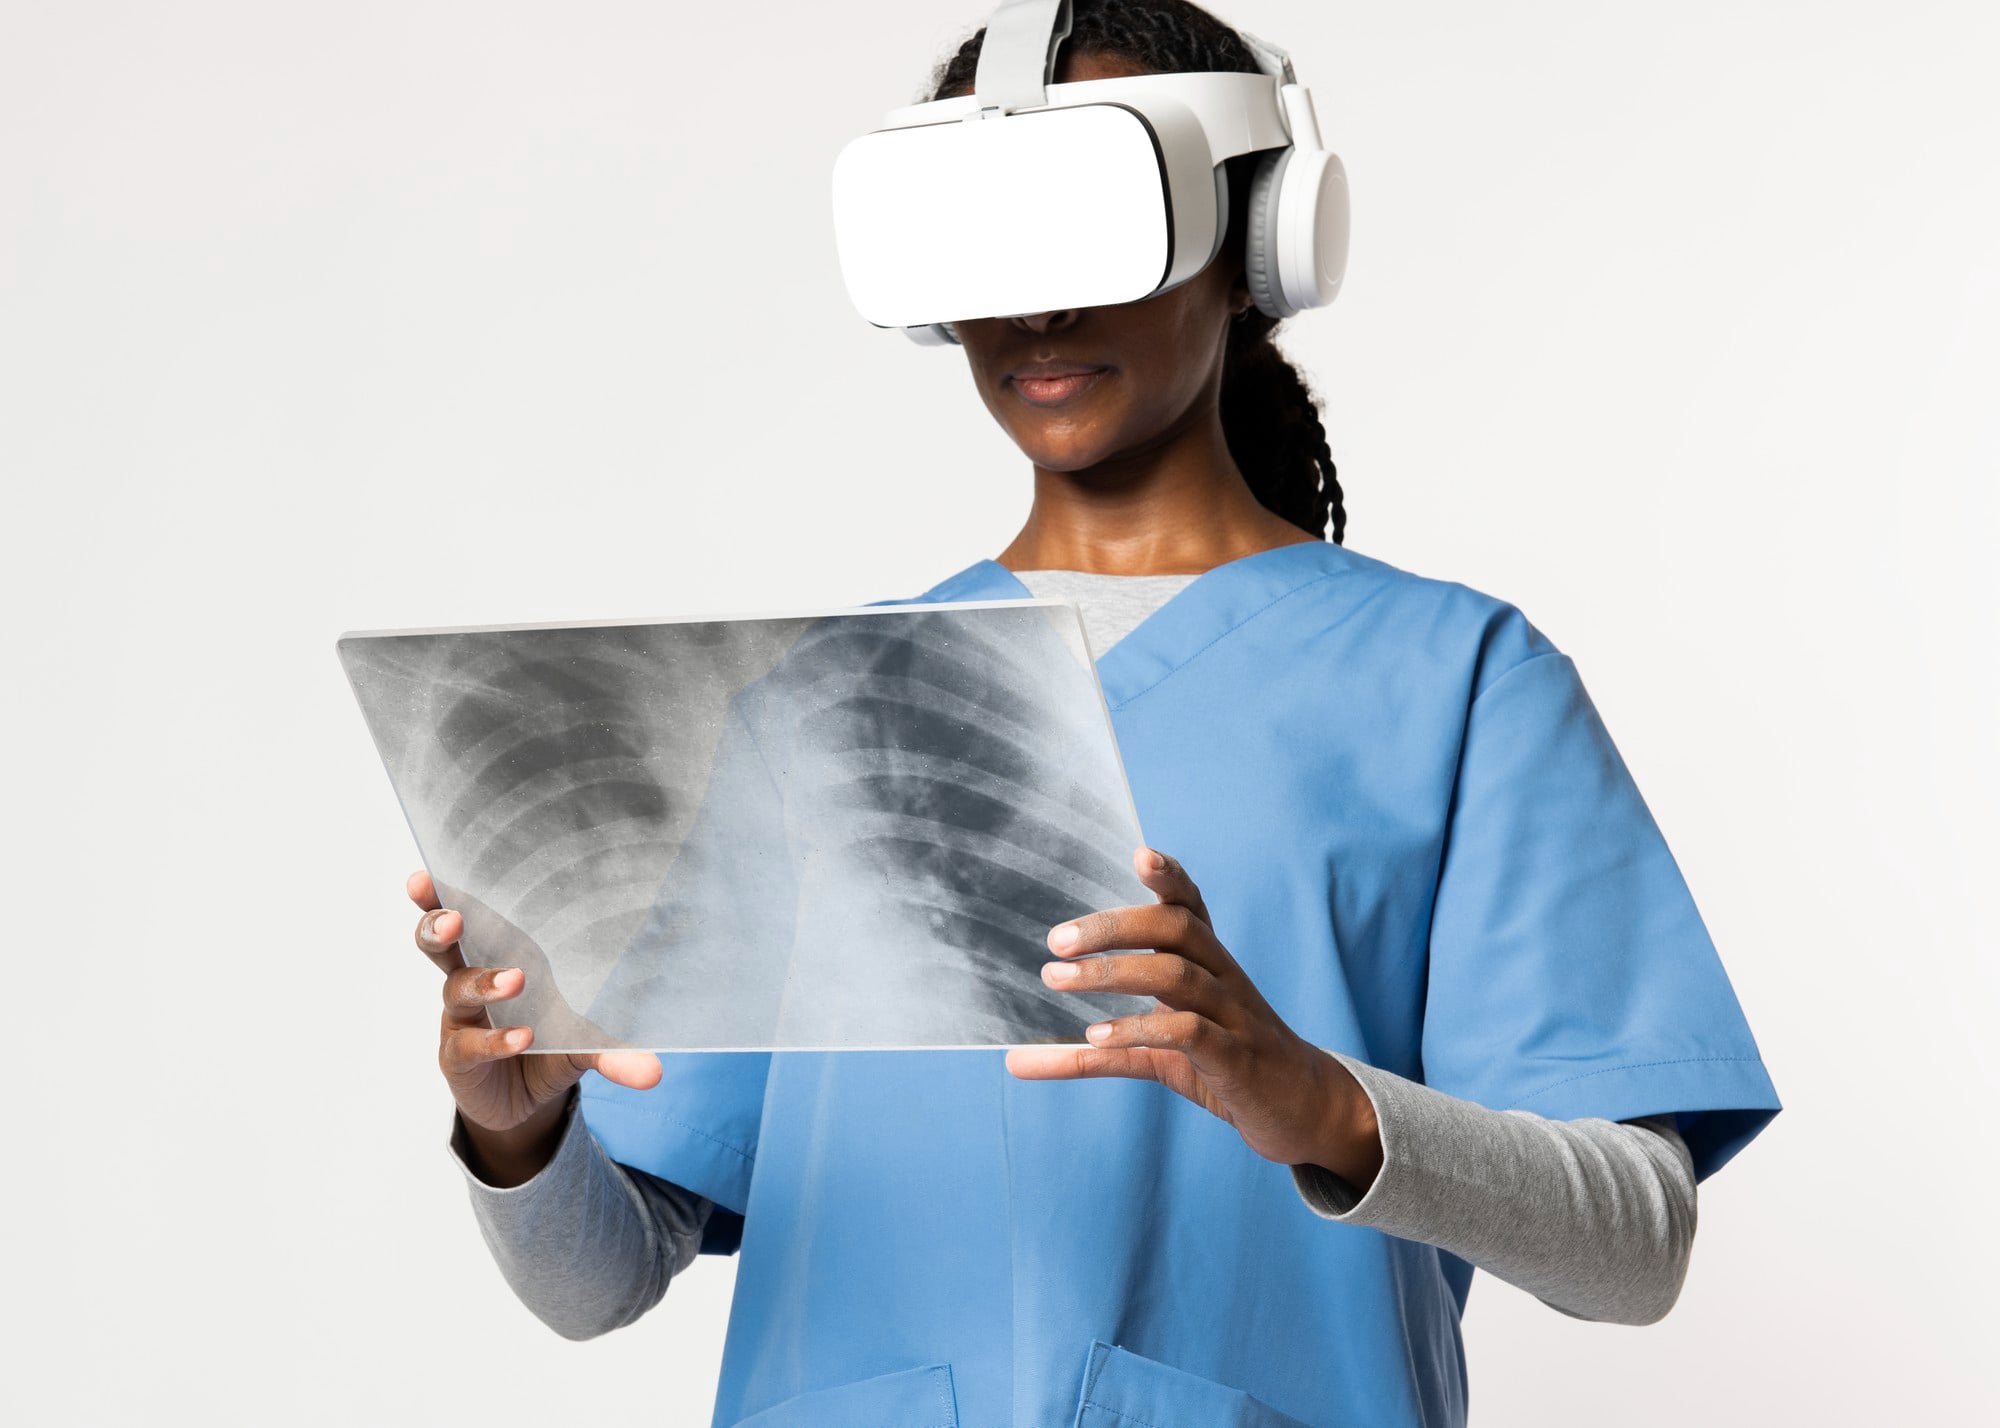 Virtual Reality in Healthcare: Therapy, Training, and Pain Management - Technology Innovators